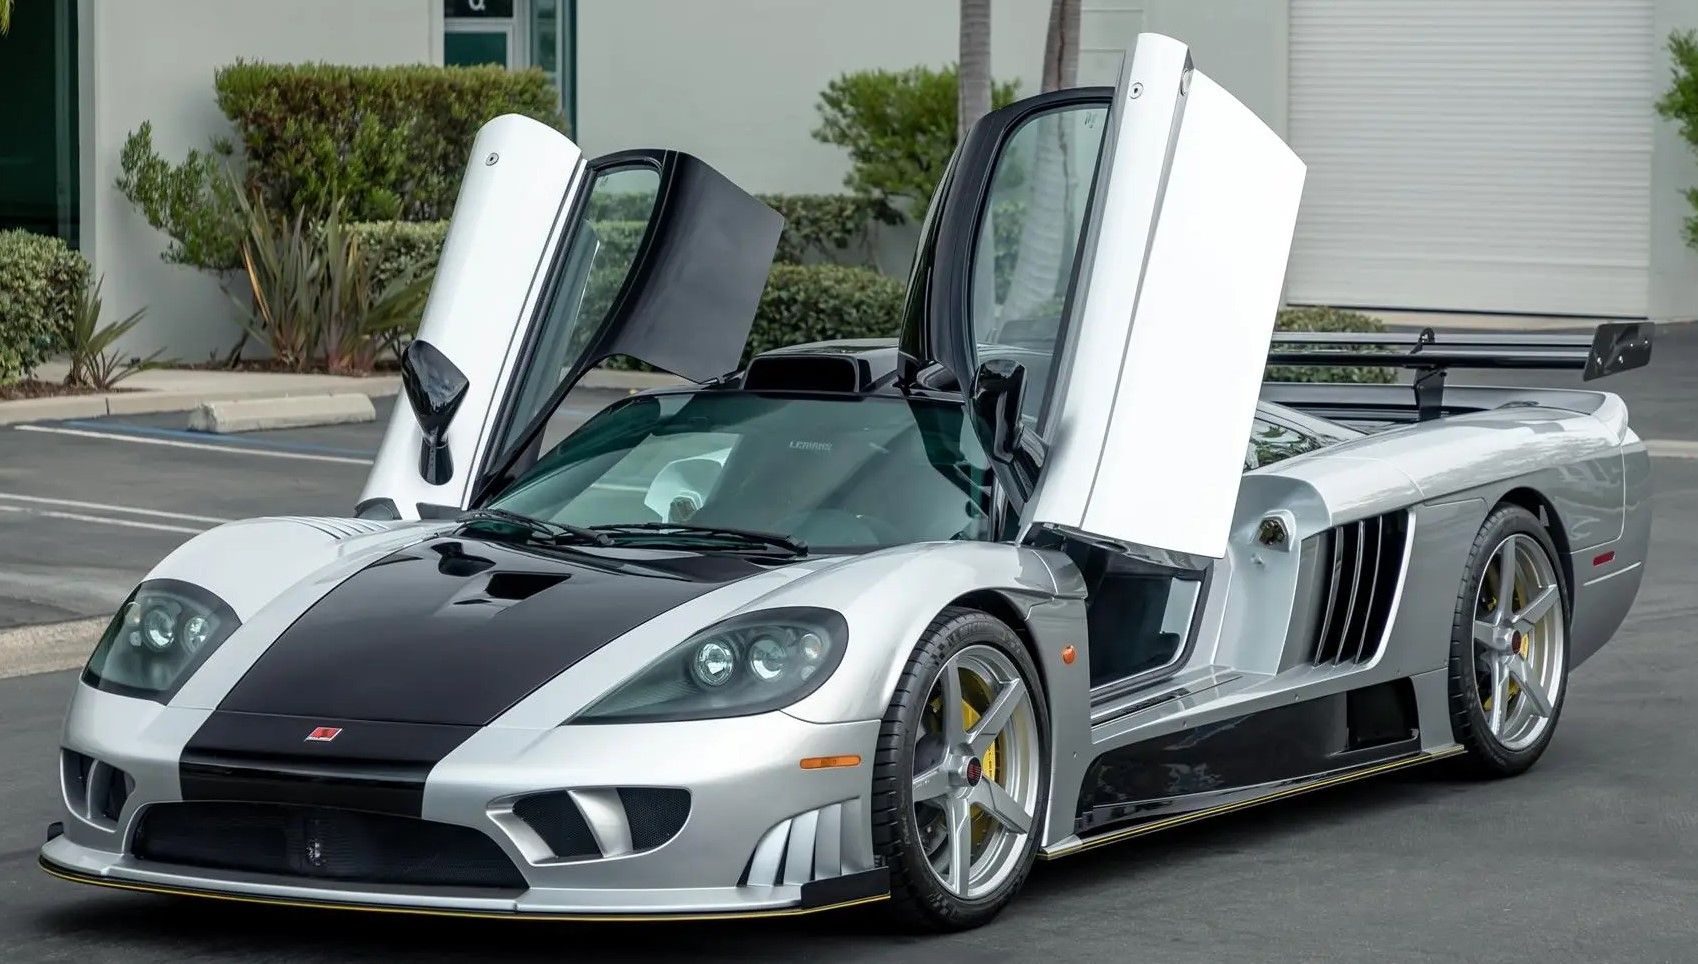 Gray 2007 Saleen S7 parked outdoors with its doors open